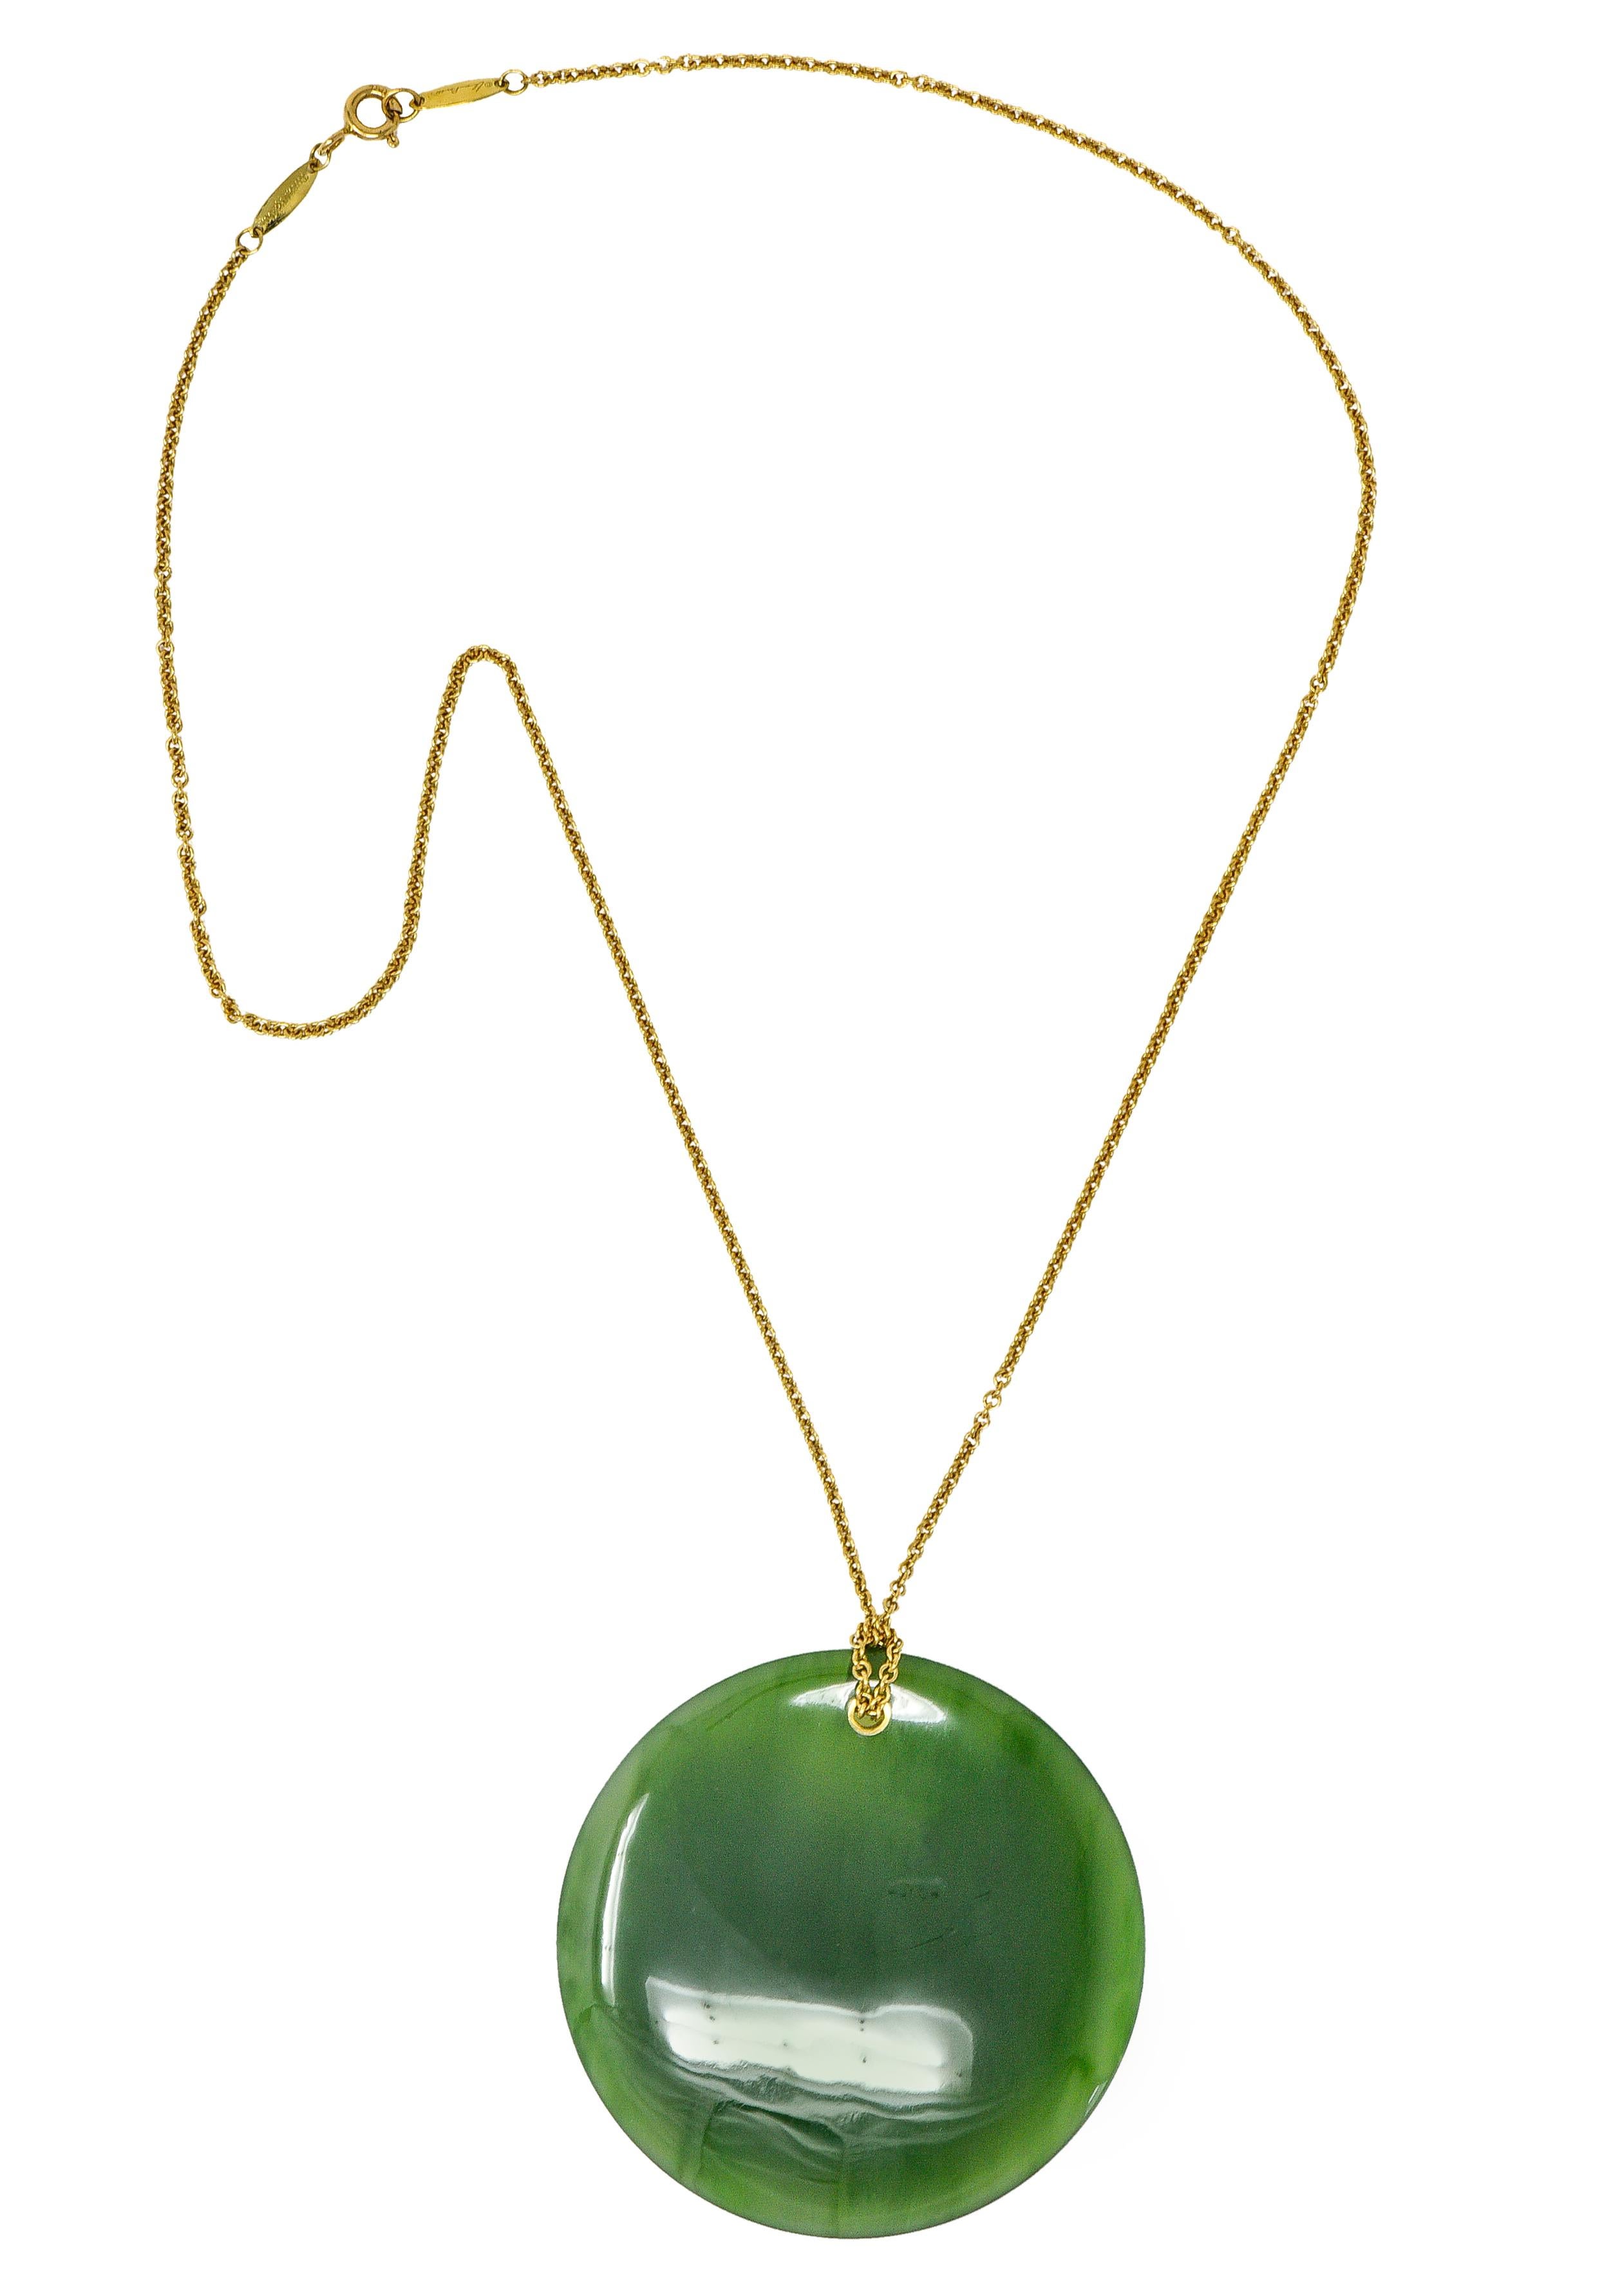 Cable chain necklace is knotted through a substantial Touchstone pendant. Circular with a subtle concave impressions. Translucent yellowish green in color with mild dark green mottling. Completed by a spring ring clasp with logo links. Stamped 750